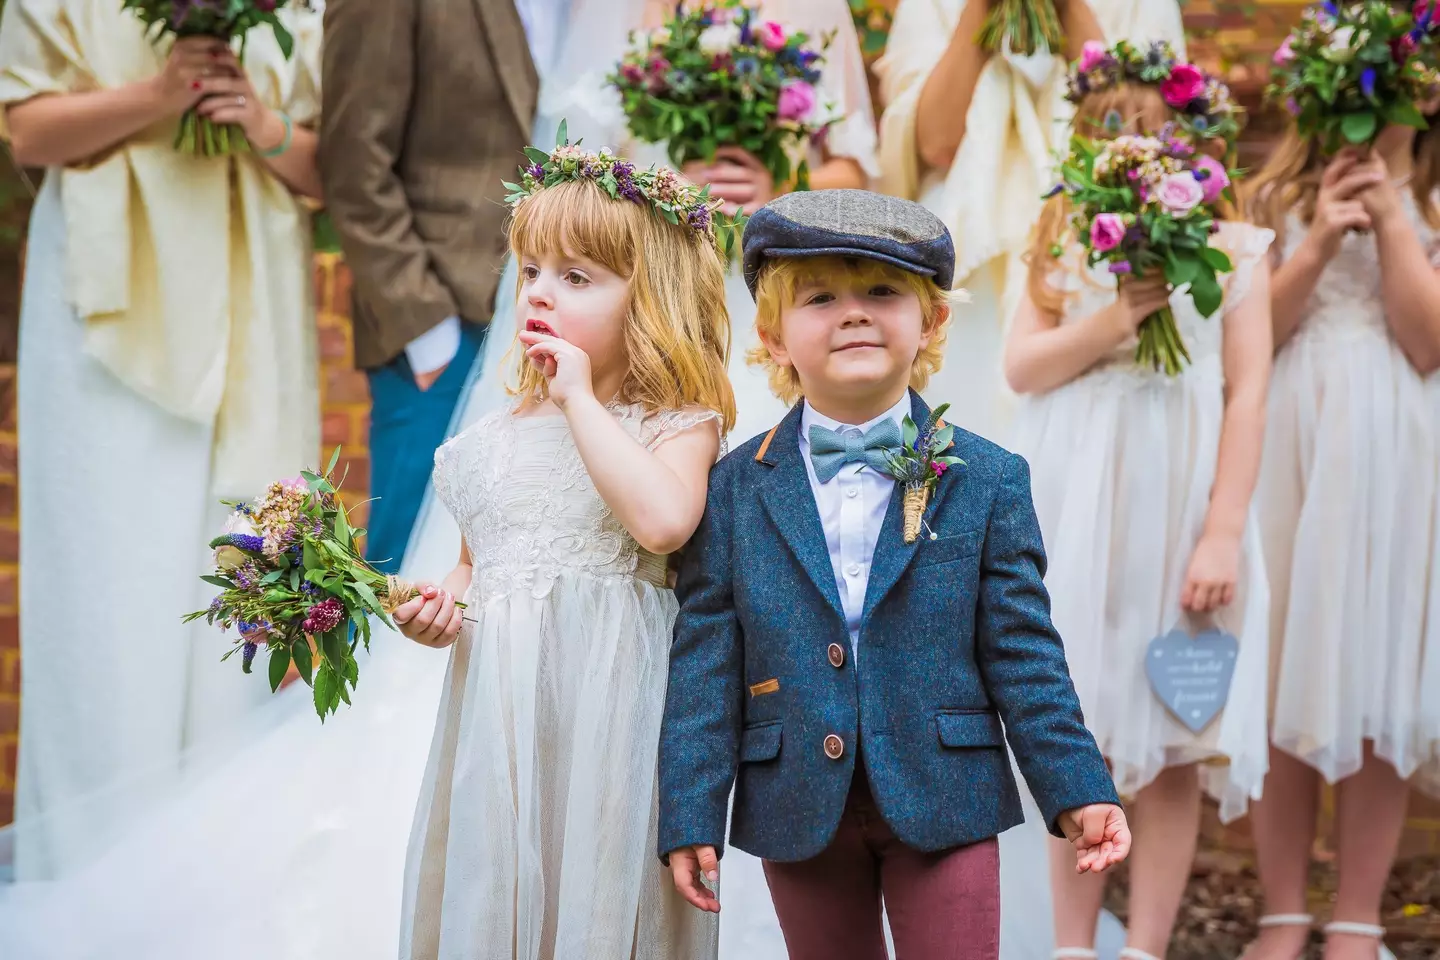 Having kids at weddings can be a divisive topic.